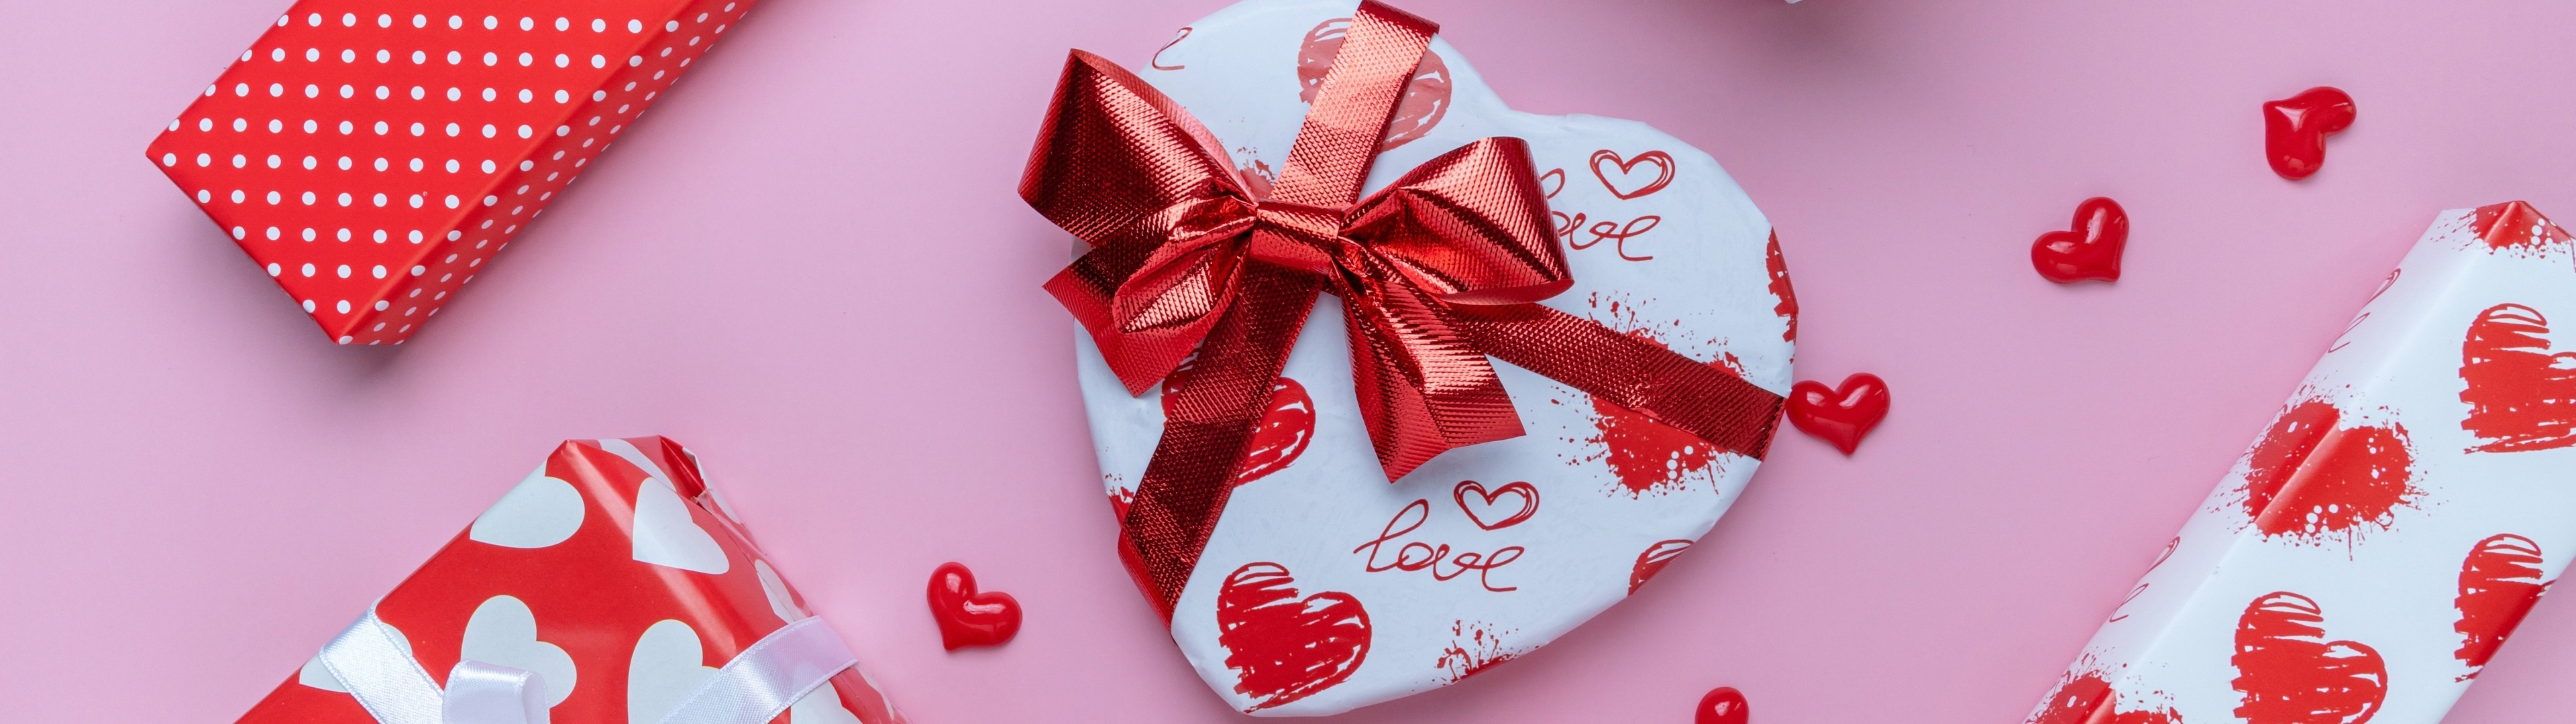 Heart shape, Valentine gifts, Gift boxes, Red hearts, 3840x1080 Dual Screen Desktop